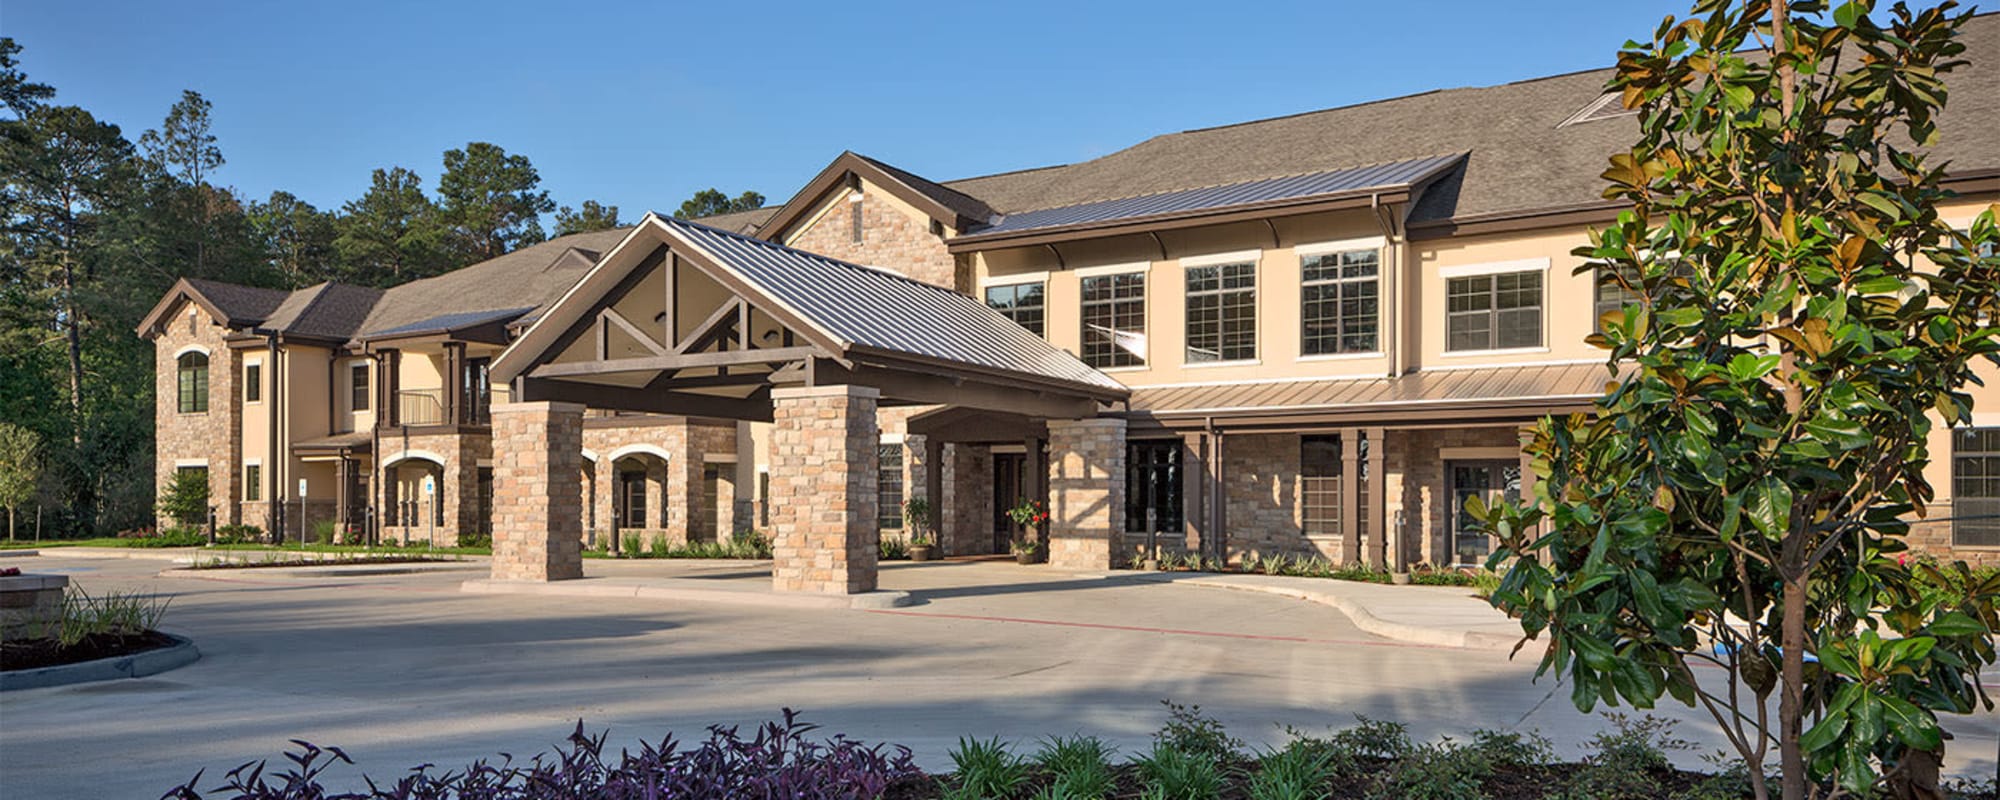 Our Community of Spring Creek Village in Spring, Texas